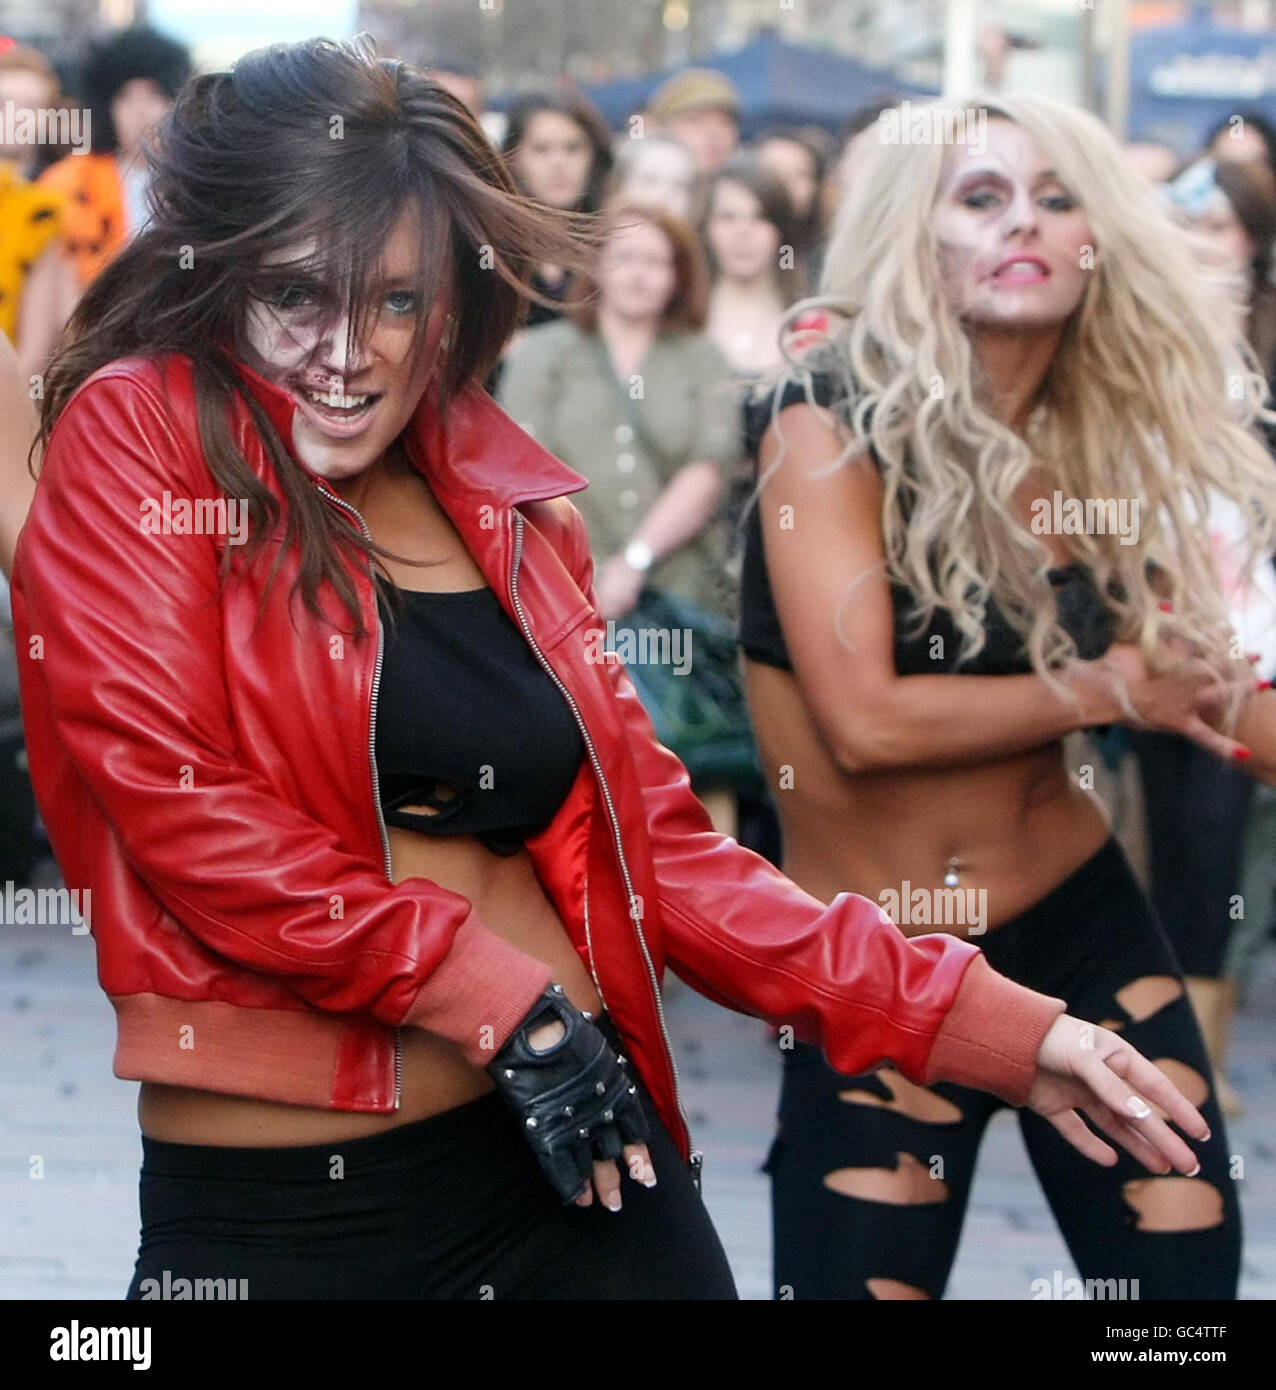 Gemma McKee leads the Scottish Rockettes in a recreation of Michael Jackson's Thriller music video on Buchanan Street in Glasgow, to promote a Halloween themed night at the Karibu Klub. Stock Photo